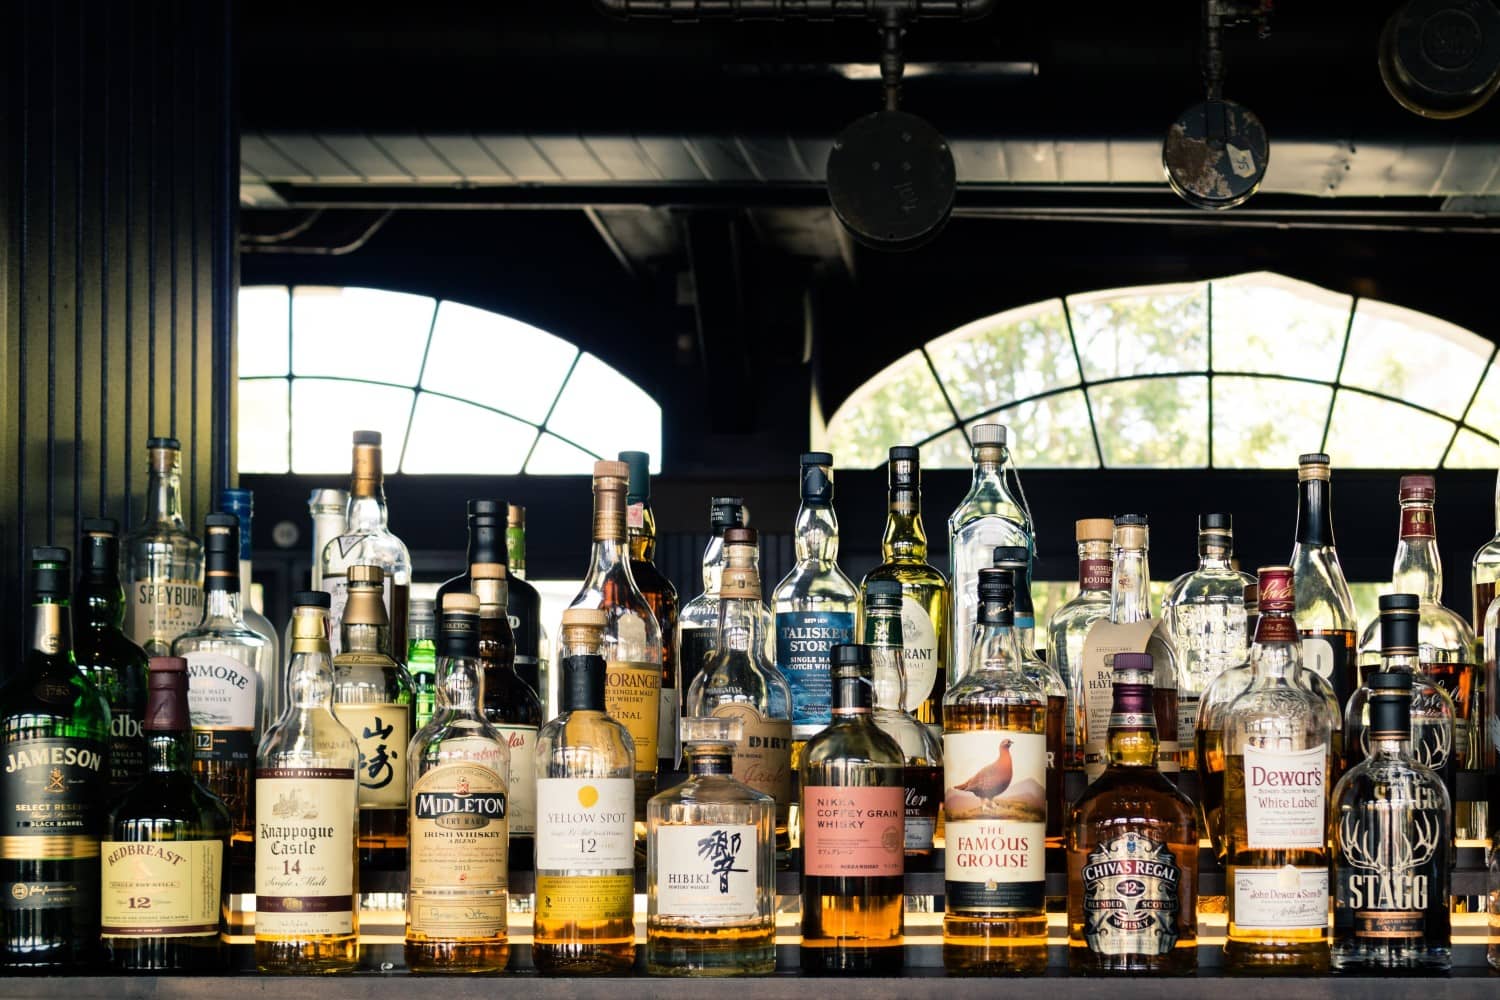 Several kinds of whisky in display to enumerate the difference between Scotch and other Whisky